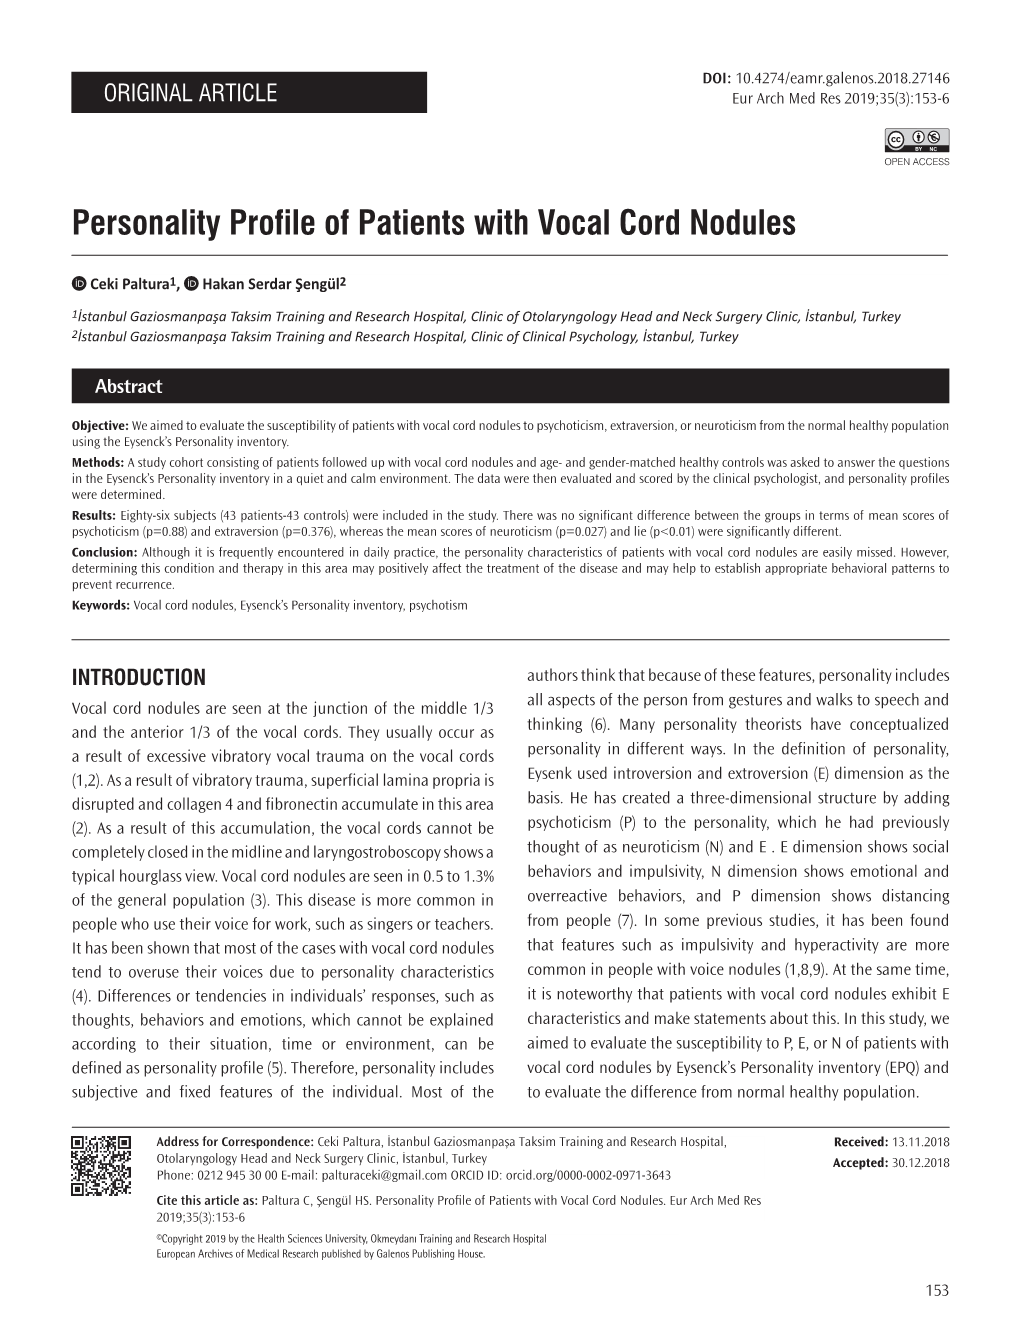 Personality Profile of Patients with Vocal Cord Nodules